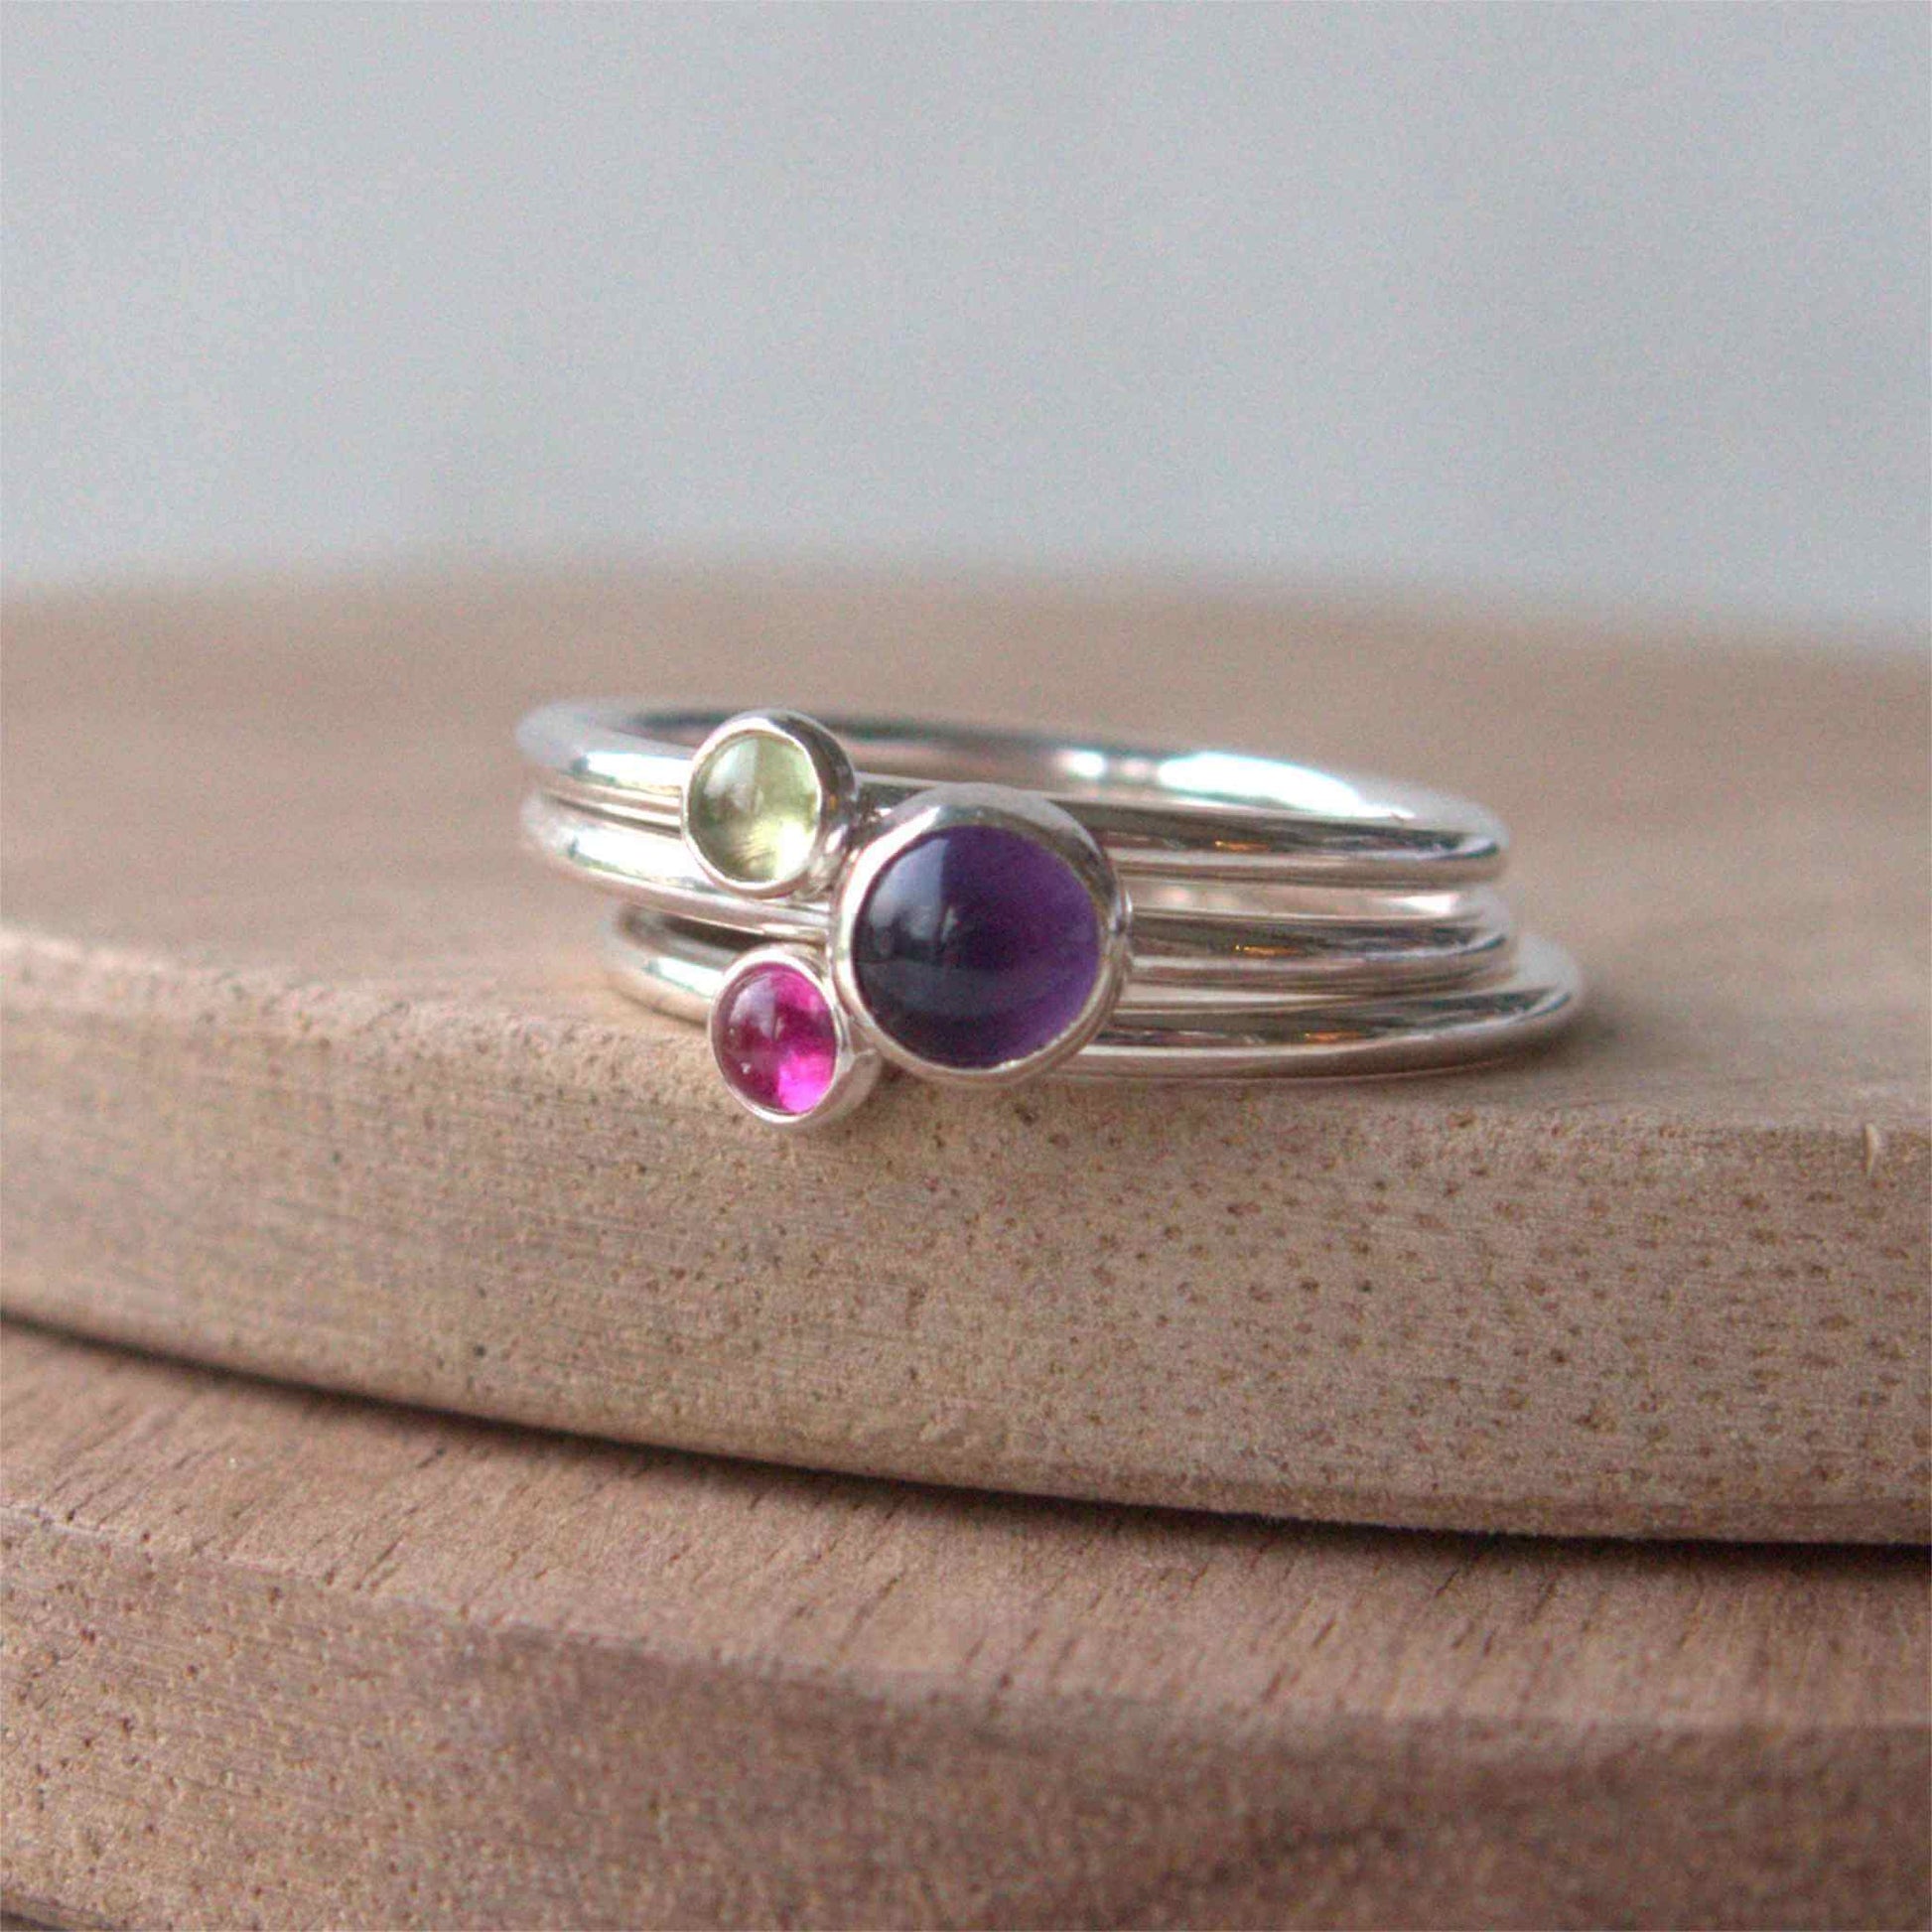 Three Birthstone Ring set made from Sterling Silver, each with a different birthstone in 5mm and 3mm size. This set has a large 5mm round Amethyst with a smaller 3mm Lab Opal and Peridot. Birthstones for August, February and July. Handmade in Scotland by Maram Jewellery